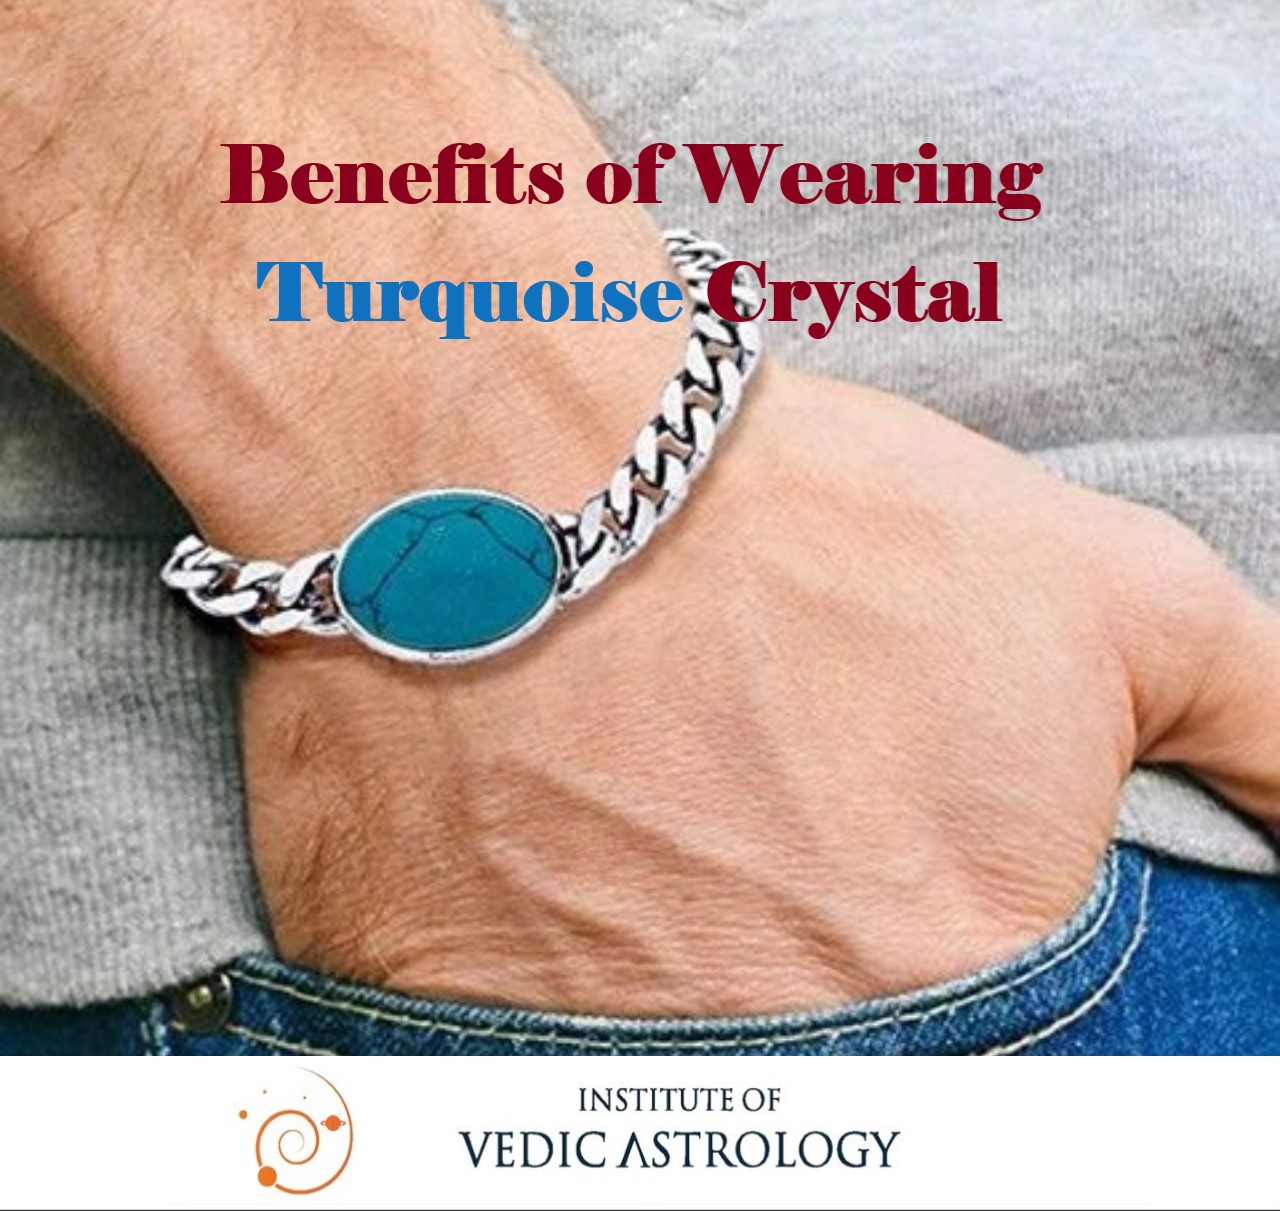 Benefits of Wearing Turquoise Crystal